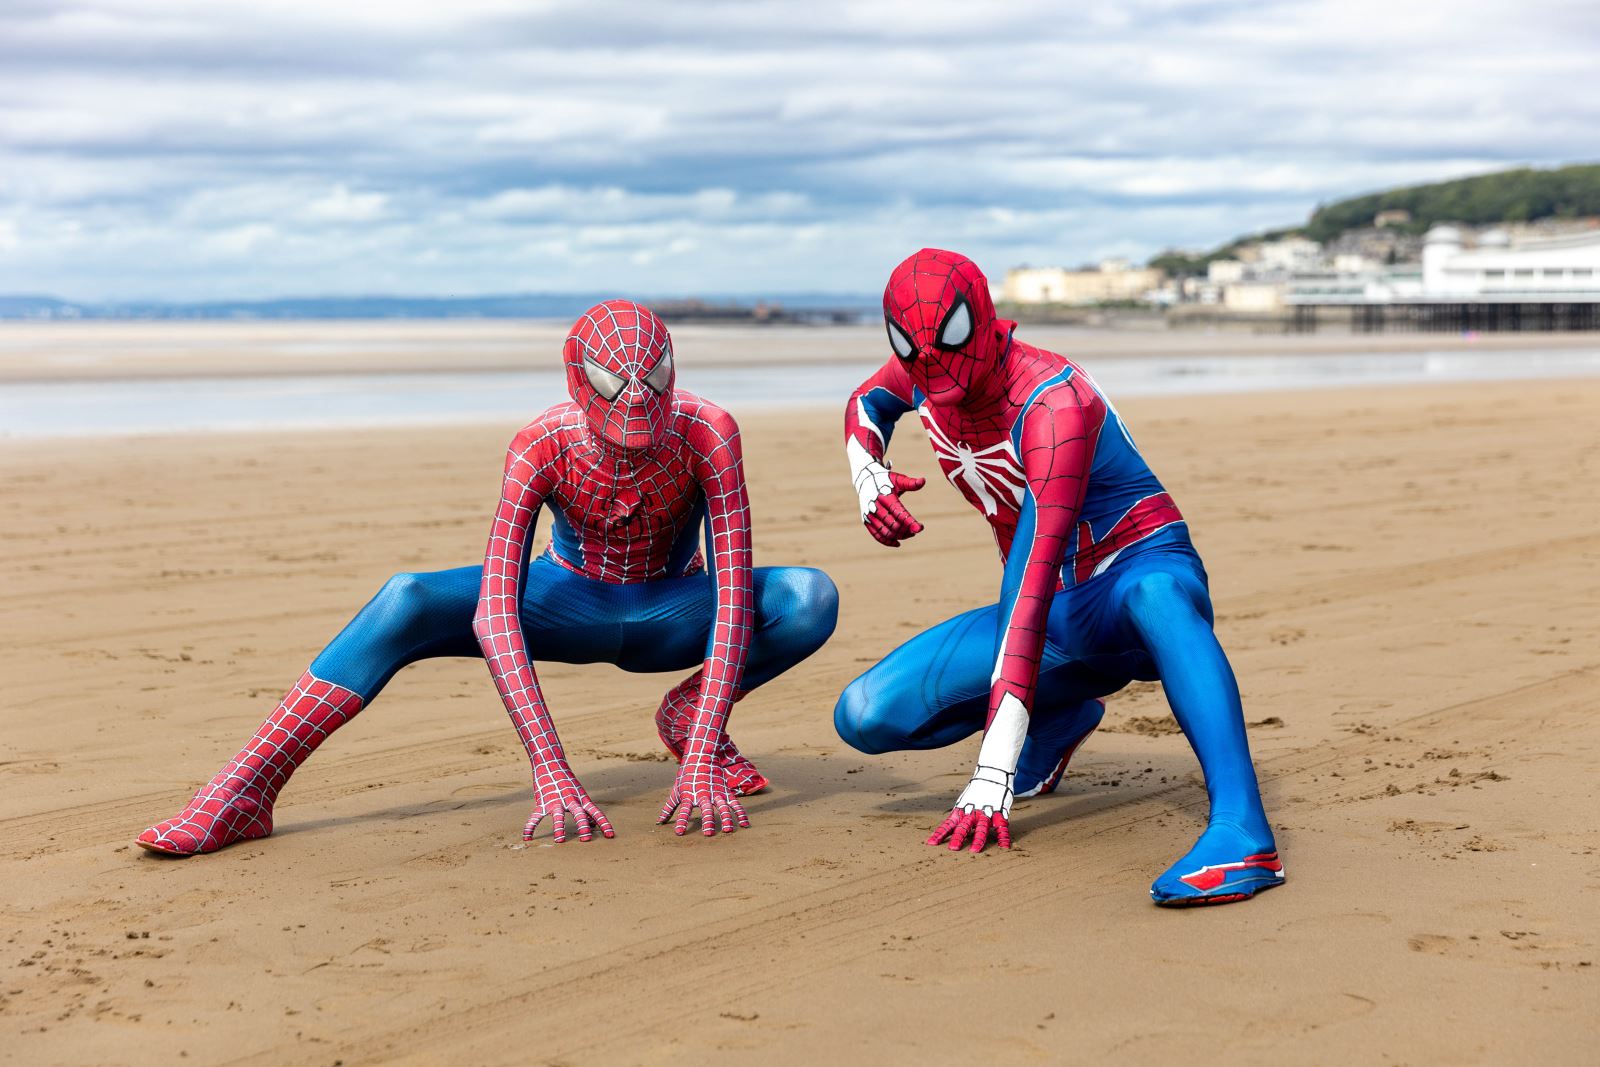 Two figures in Spidermen costumes in crouched down Spiderman positions on a beach